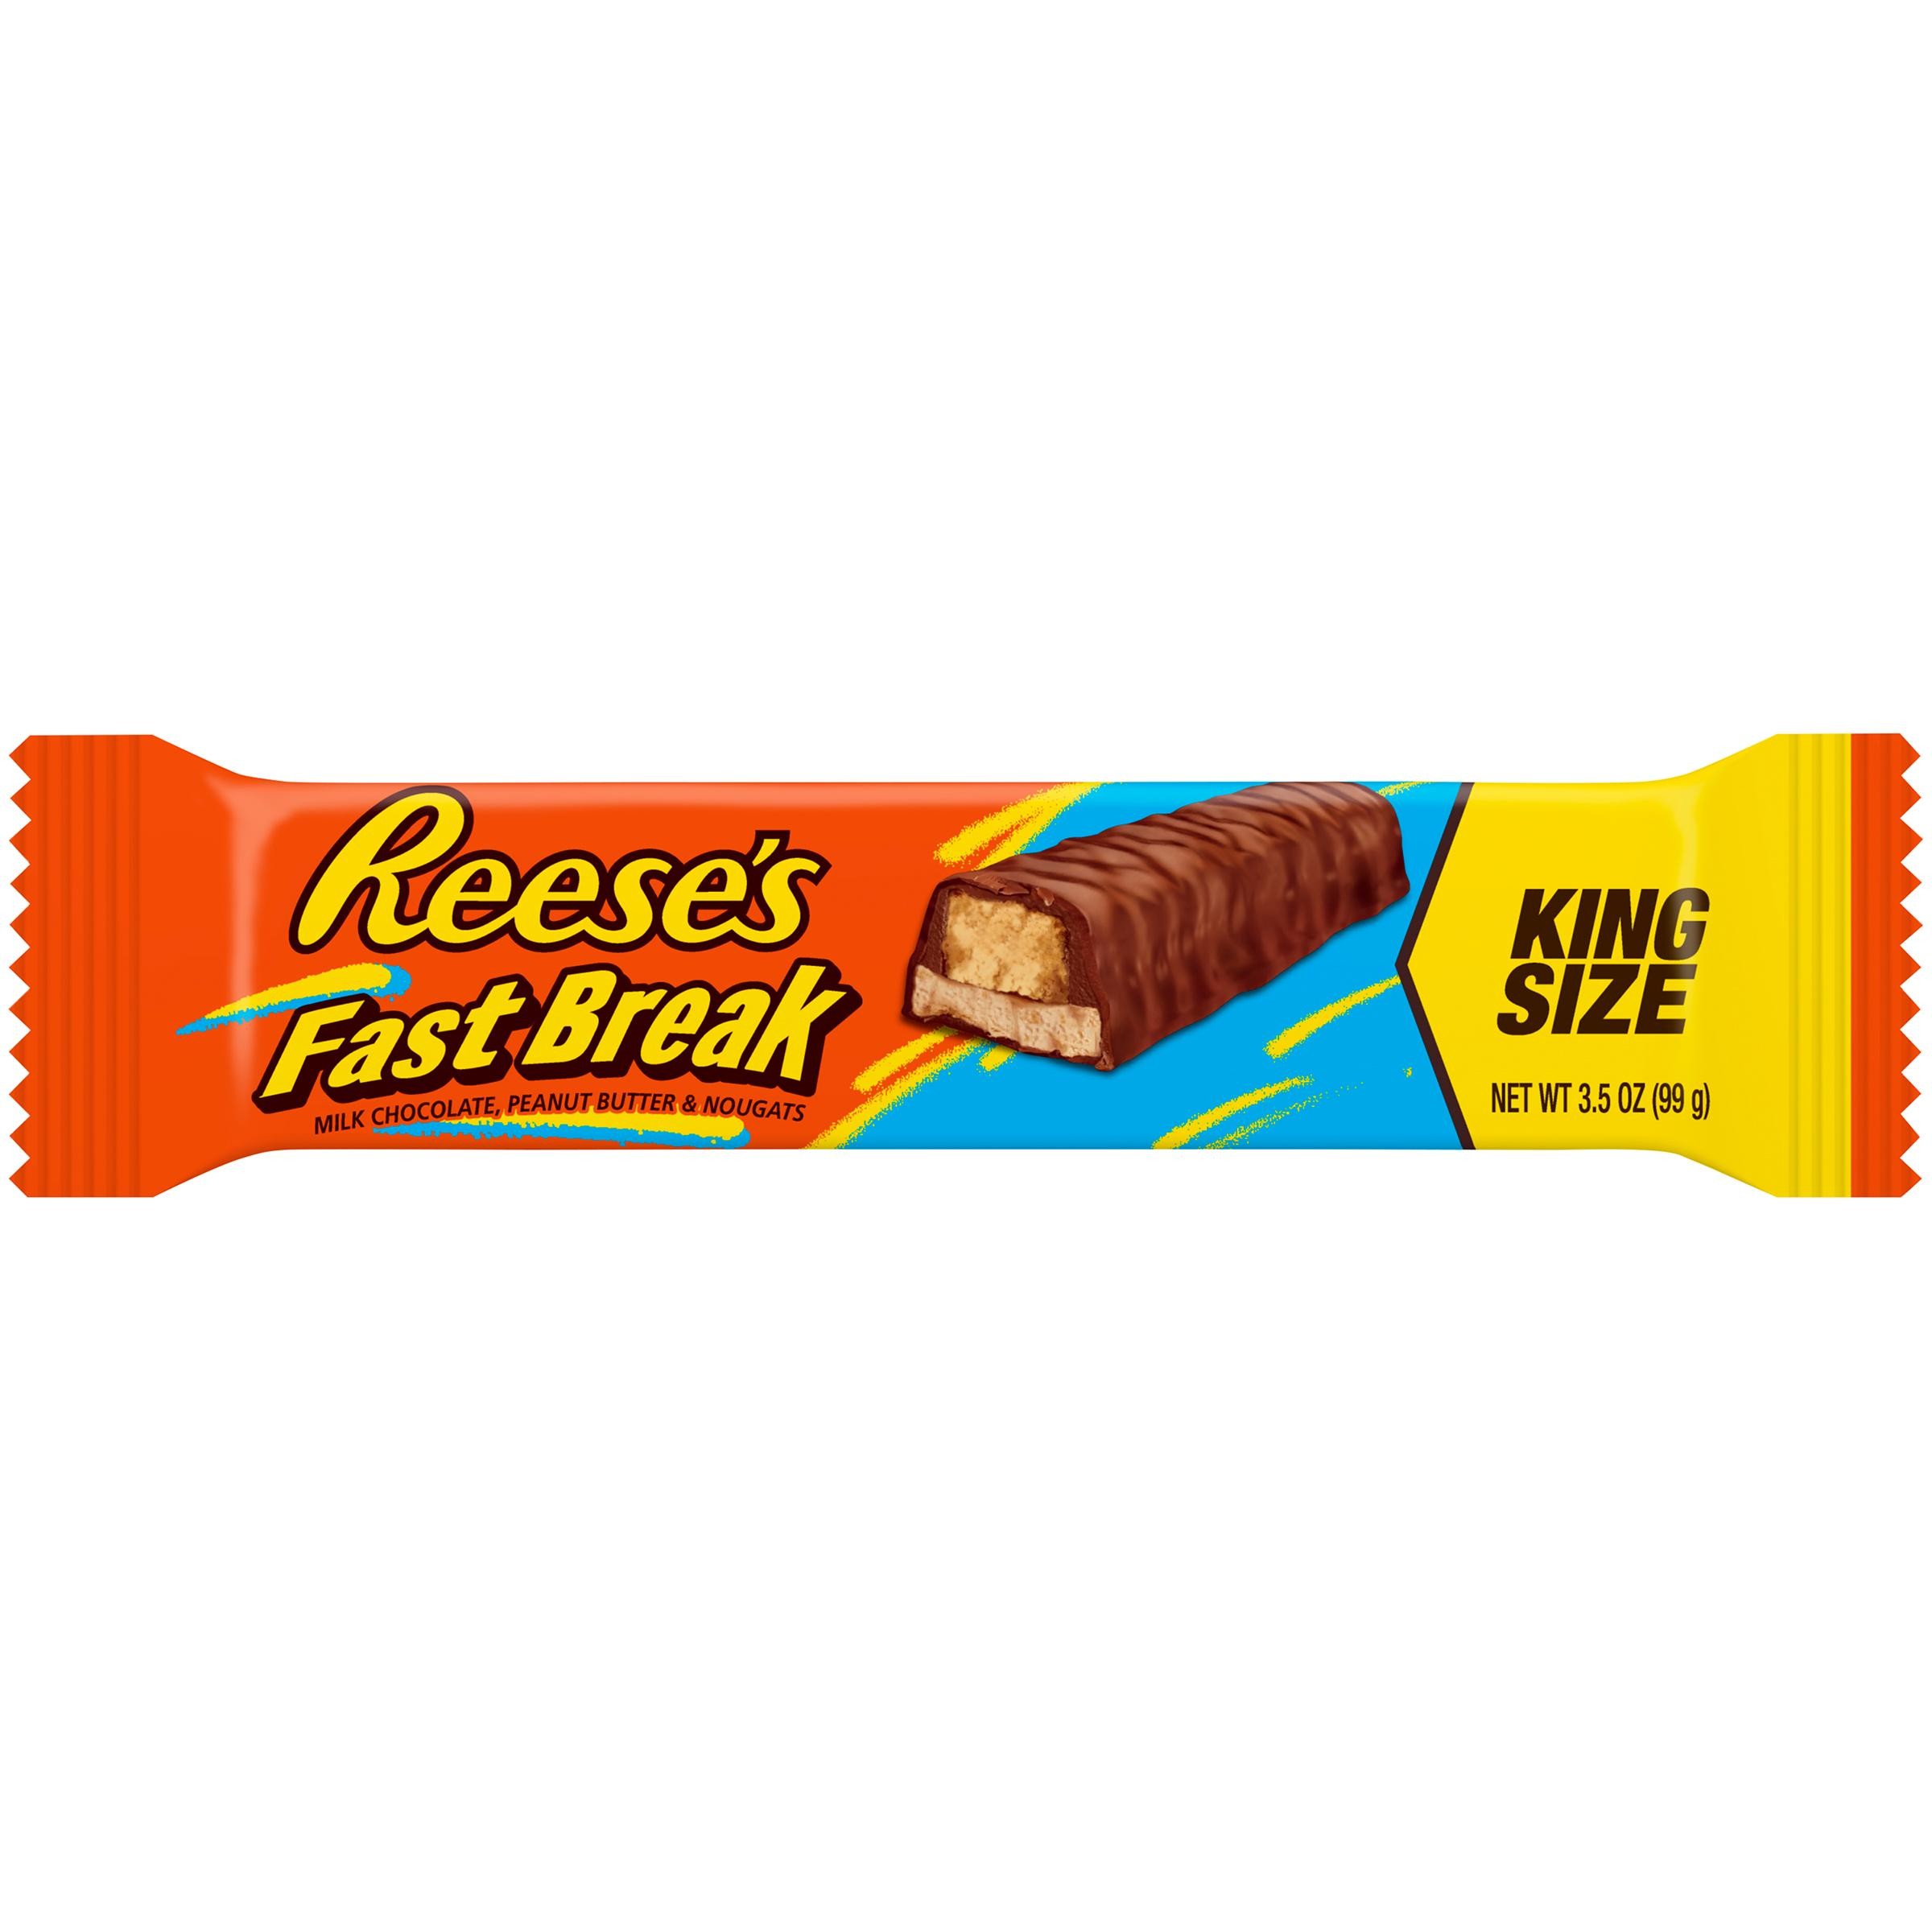 Reese's King Size Candy, Gluten Free, Bar Milk Chocolate, Peanut Butter and Nougat - 3.5 Oz